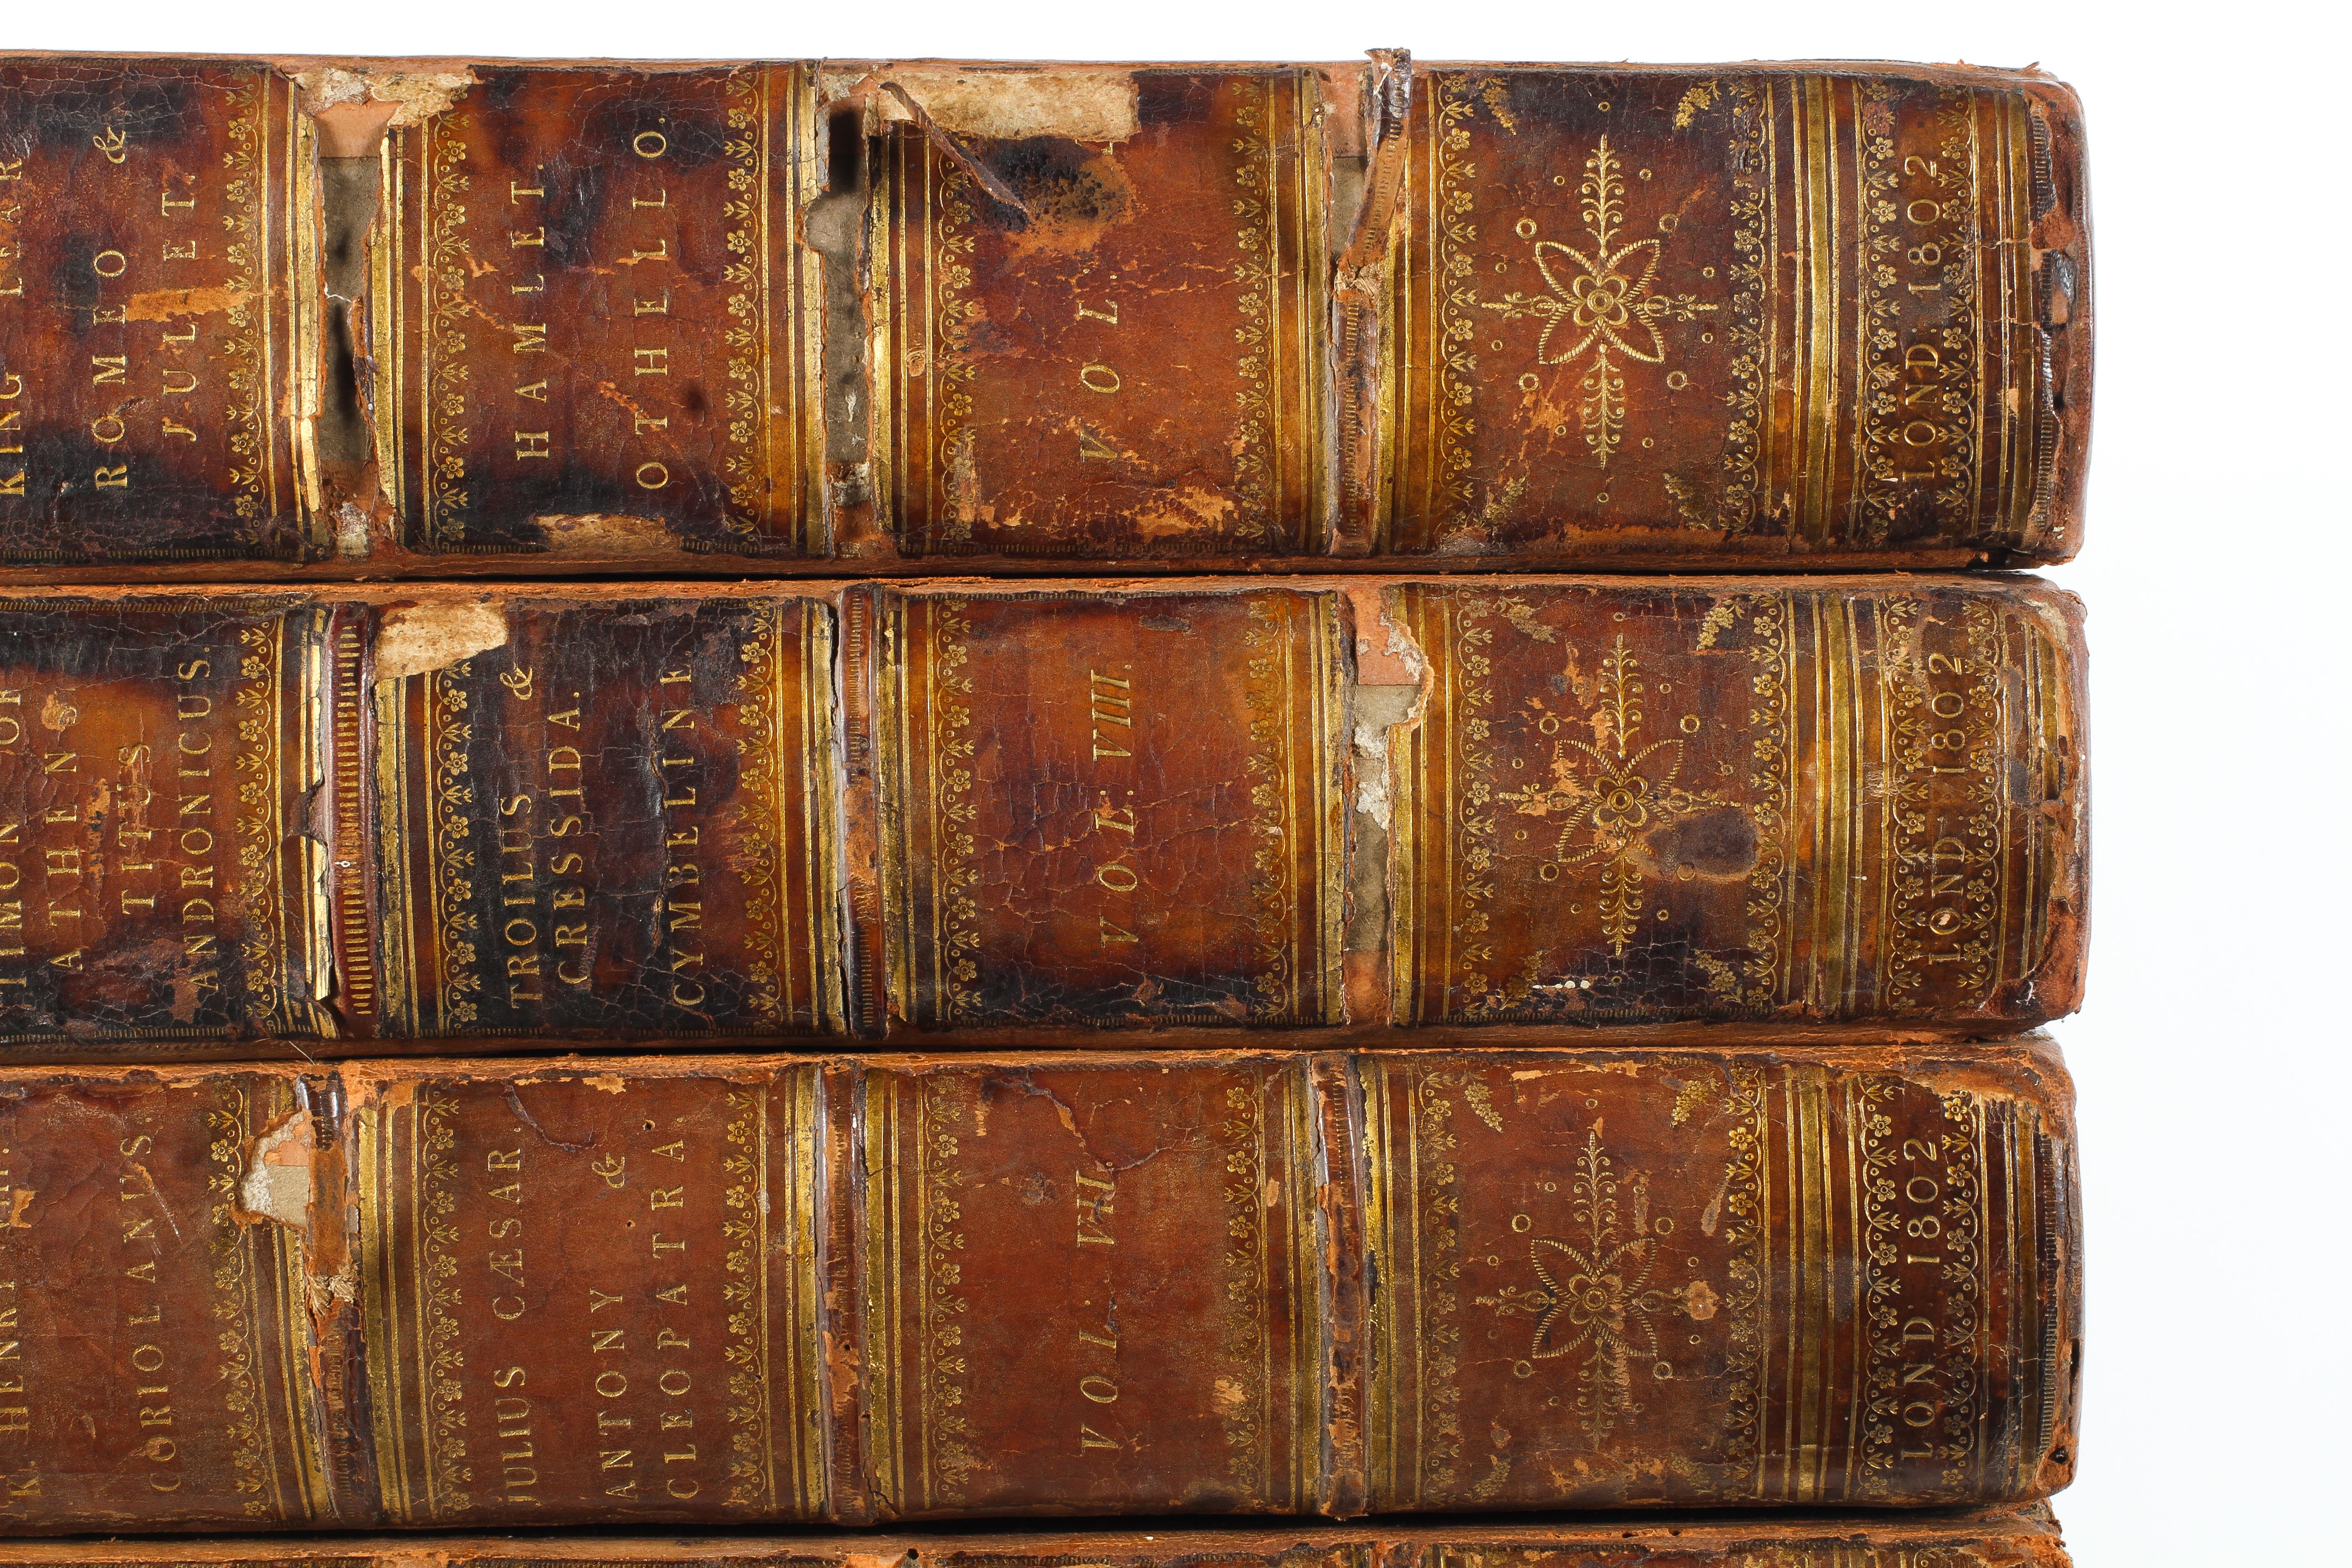 Nine Volumes of 'The Dramatic Works of Shakespeare'. - Image 3 of 7